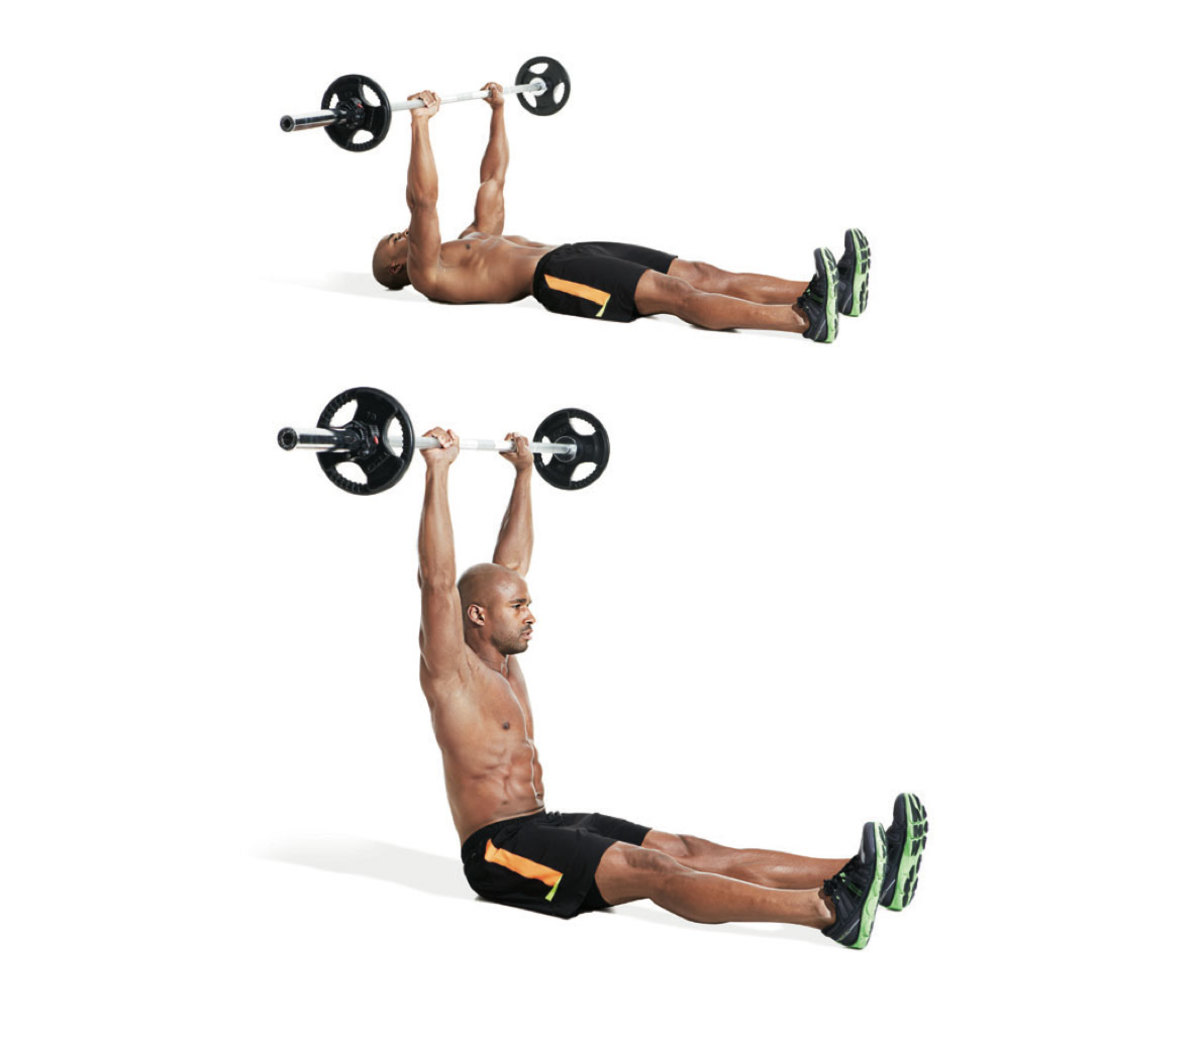 50 Best Ab Workouts of All | Journal - Men's Journal